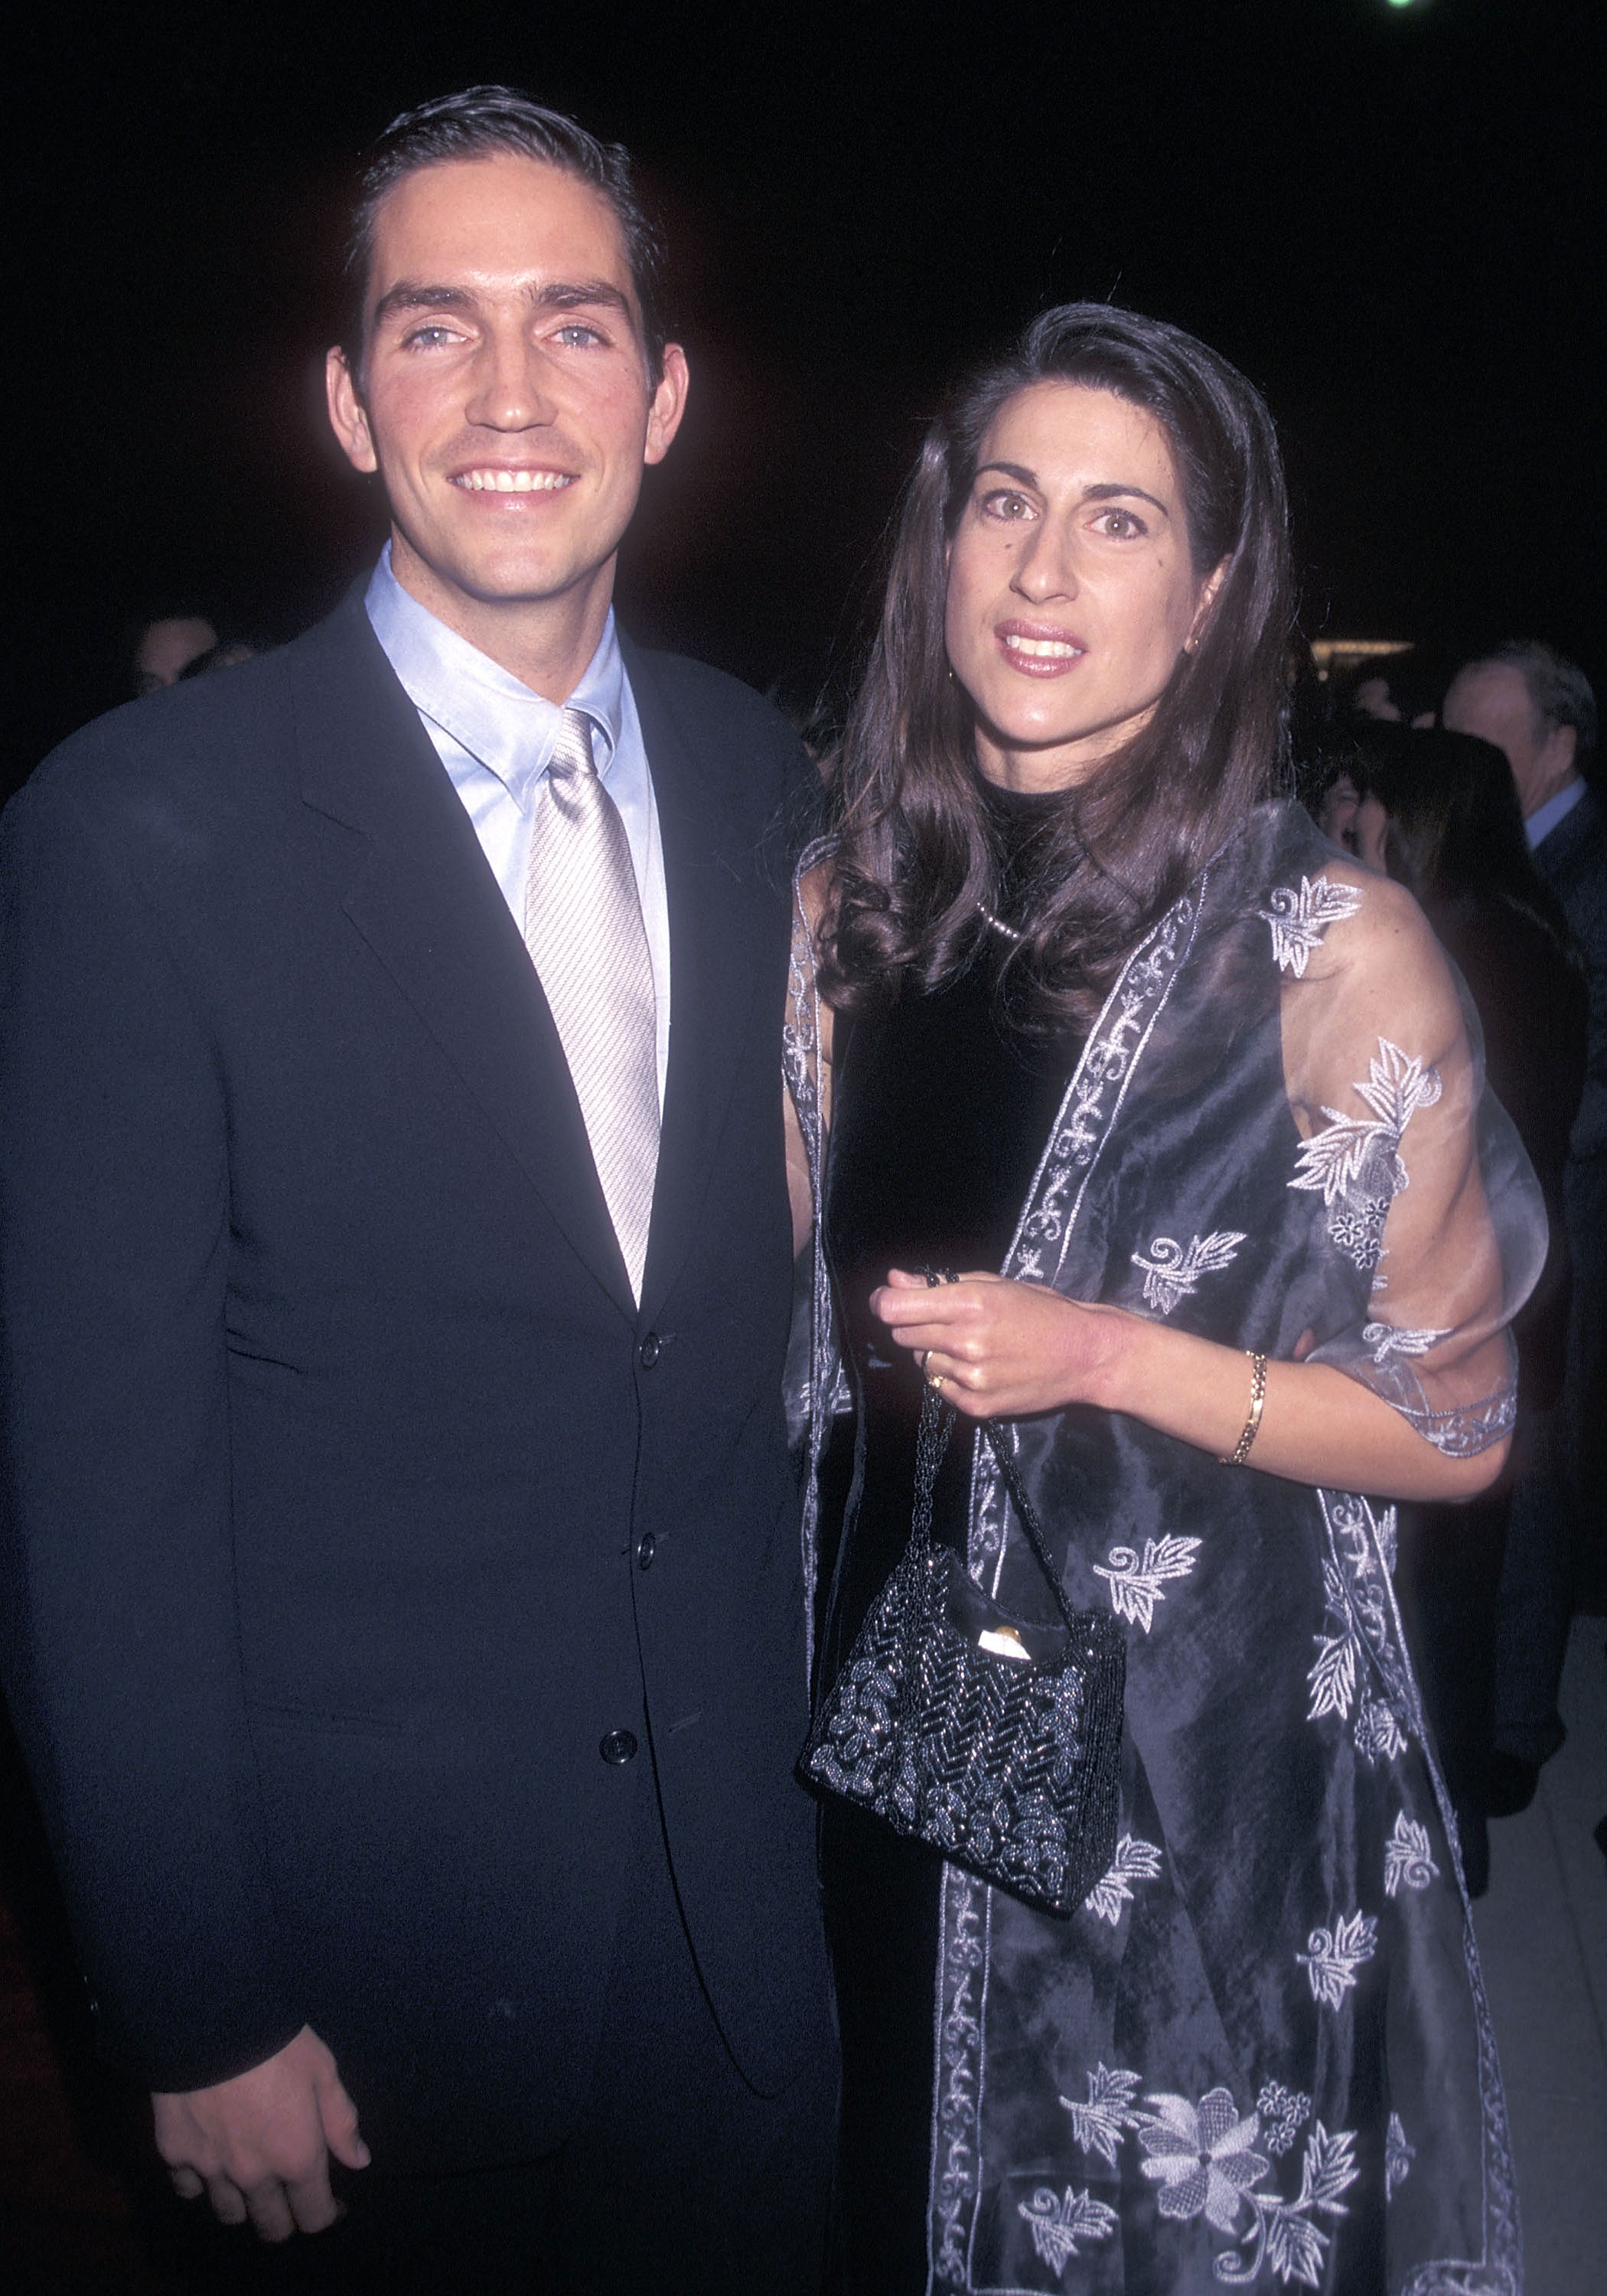 Jim Caviezel and his wife Kerri Browitt Caviezel attend "The Thin Red Line" Beverly Hills Premiere on December 22, 1998, at the Academy of Motion Picture Arts & Sciences in Beverly Hills, California. | Source: Getty Images